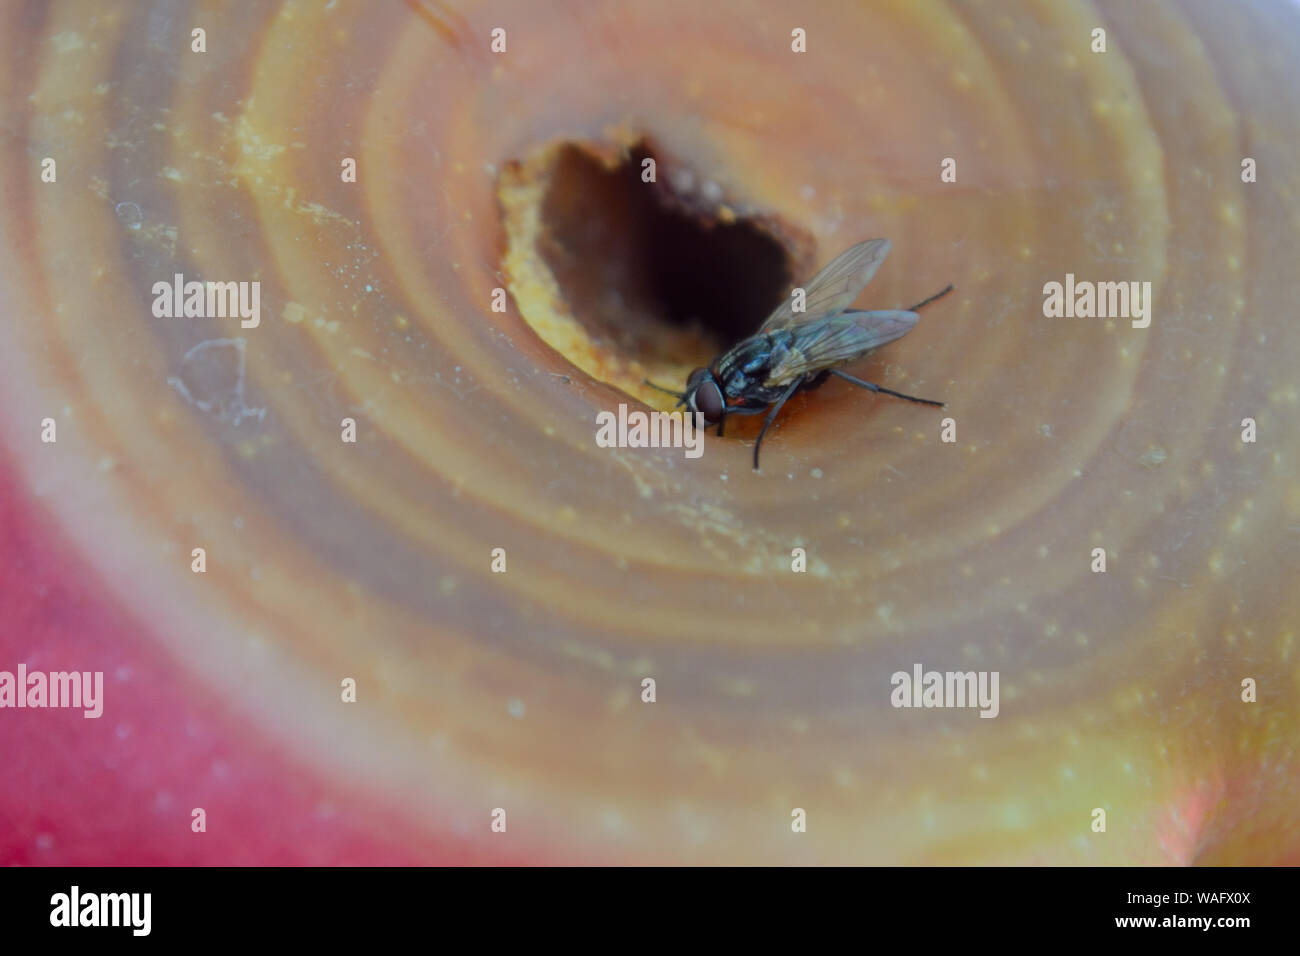 Close op of fly on rotten apple Stock Photo